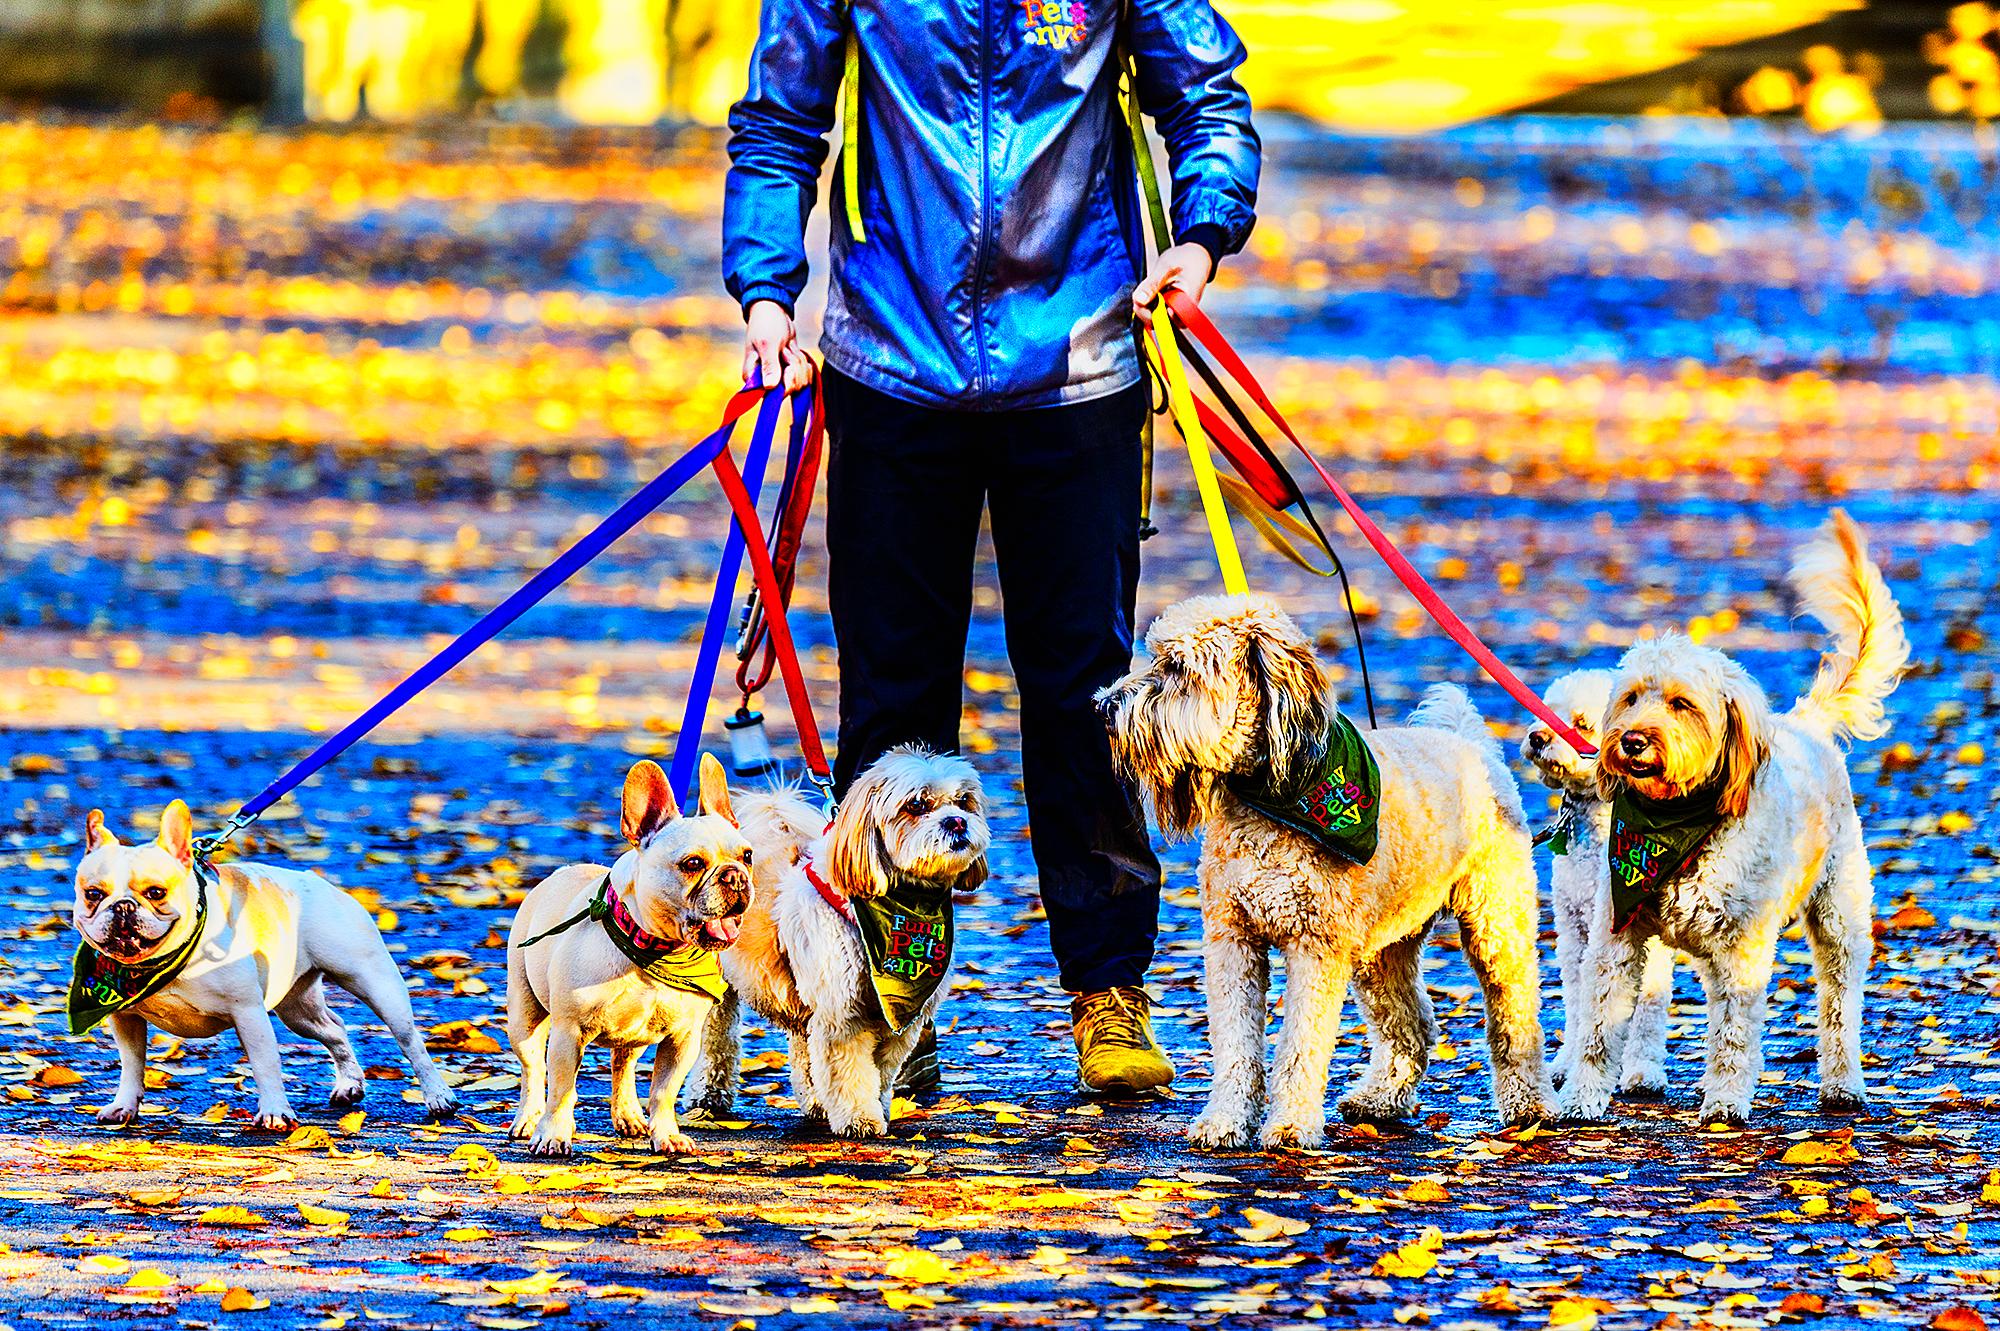 Mitchell Funk Figurative Photograph - Five Dogs on a Leash, Central Park